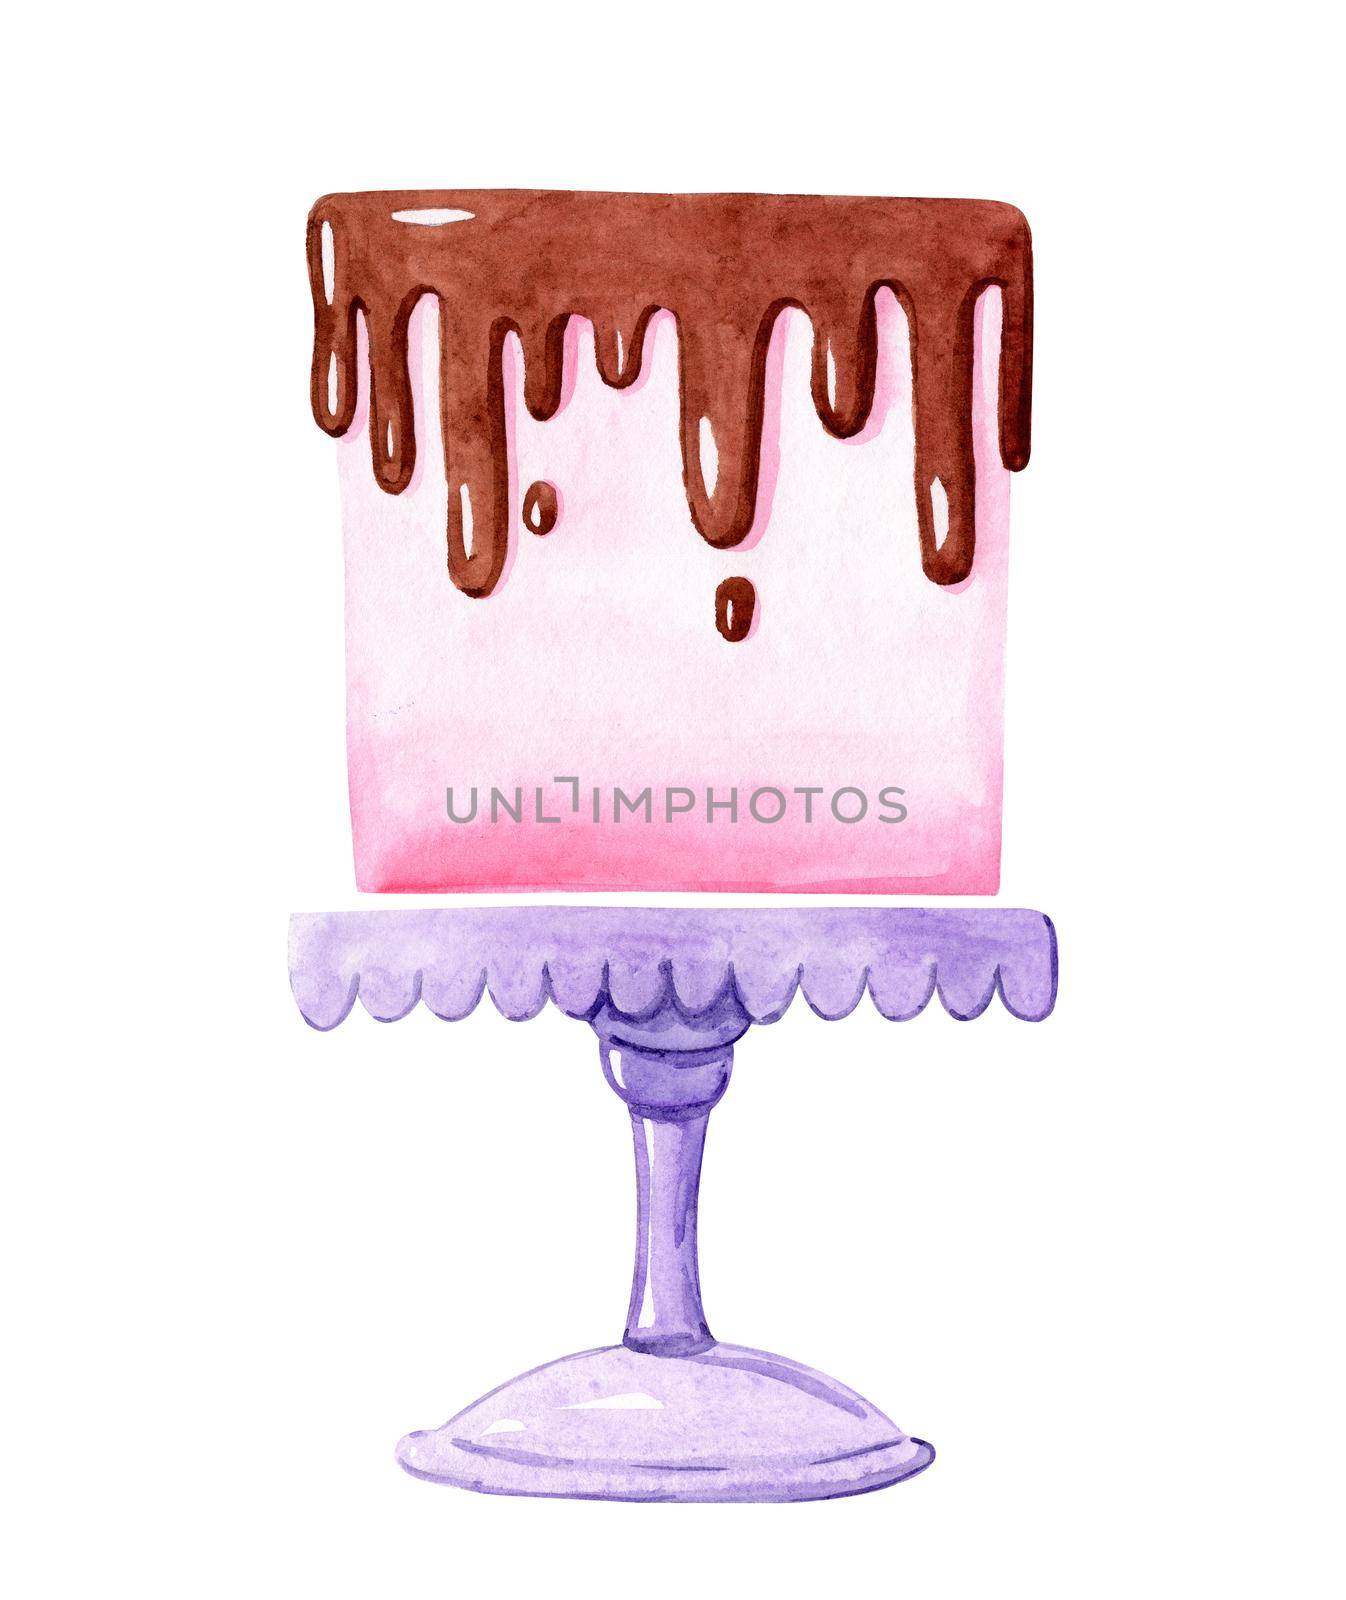 watercolor pink cake on purple stand isolated on white background. Bakery logo, catering design